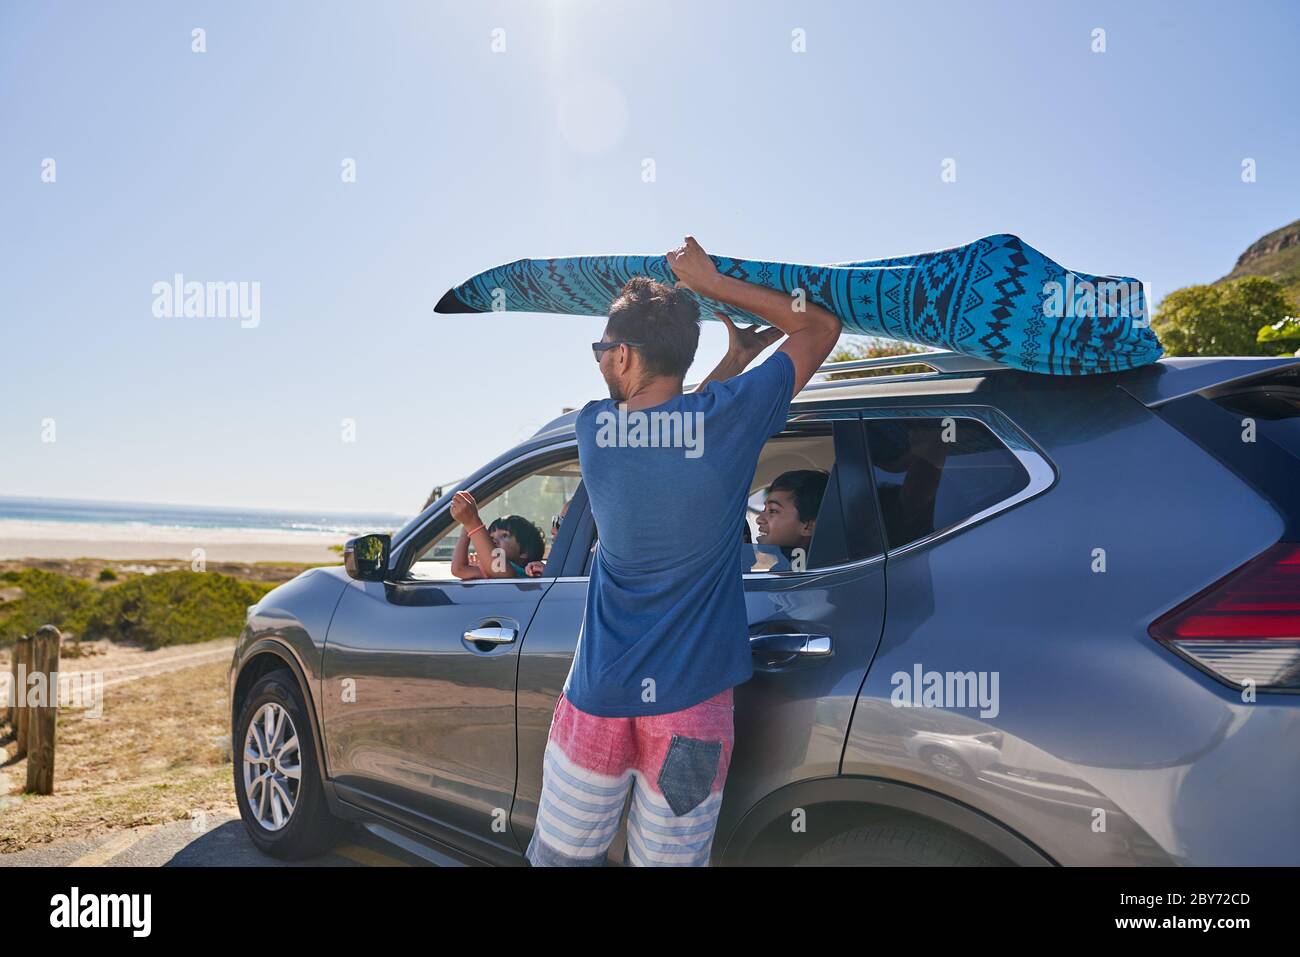 Man removing surfboard from top of car in beach parking lot Stock Photo